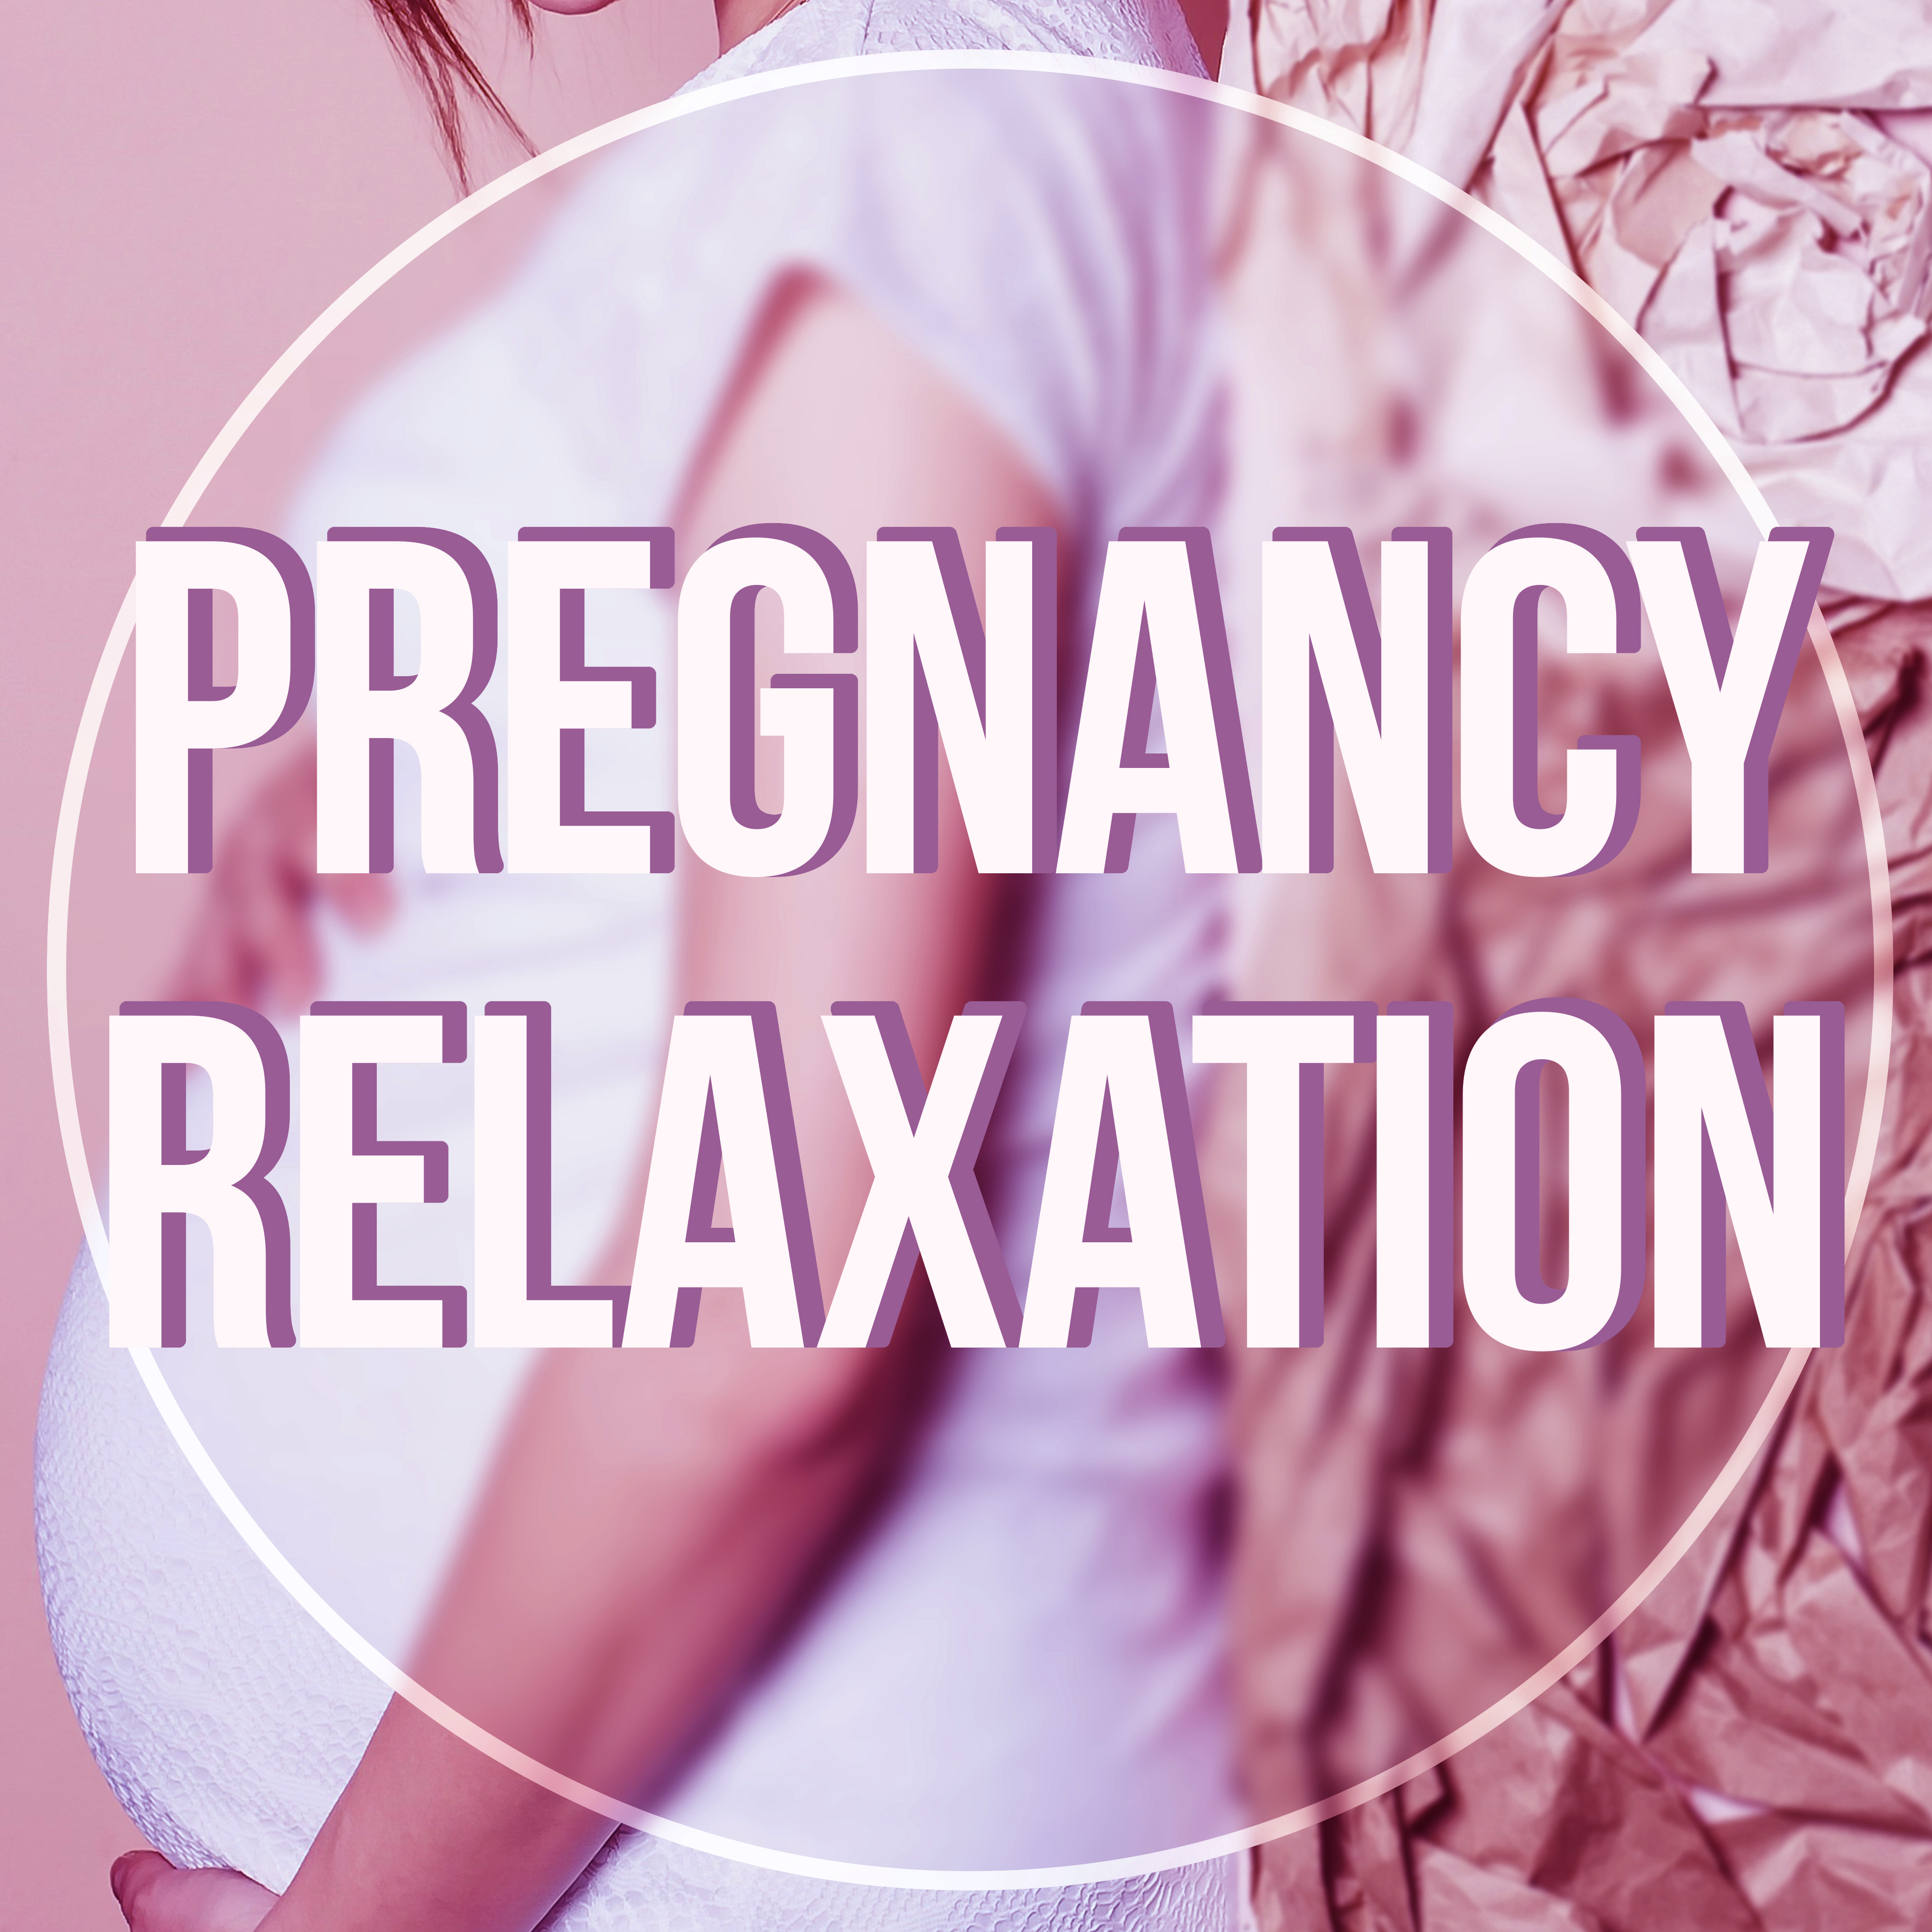 Pregnancy Relaxation  Birth, Guided Meditations, Pregnancy Music, Hypnosis for Mom and Baby, Nature Sounds, New Age